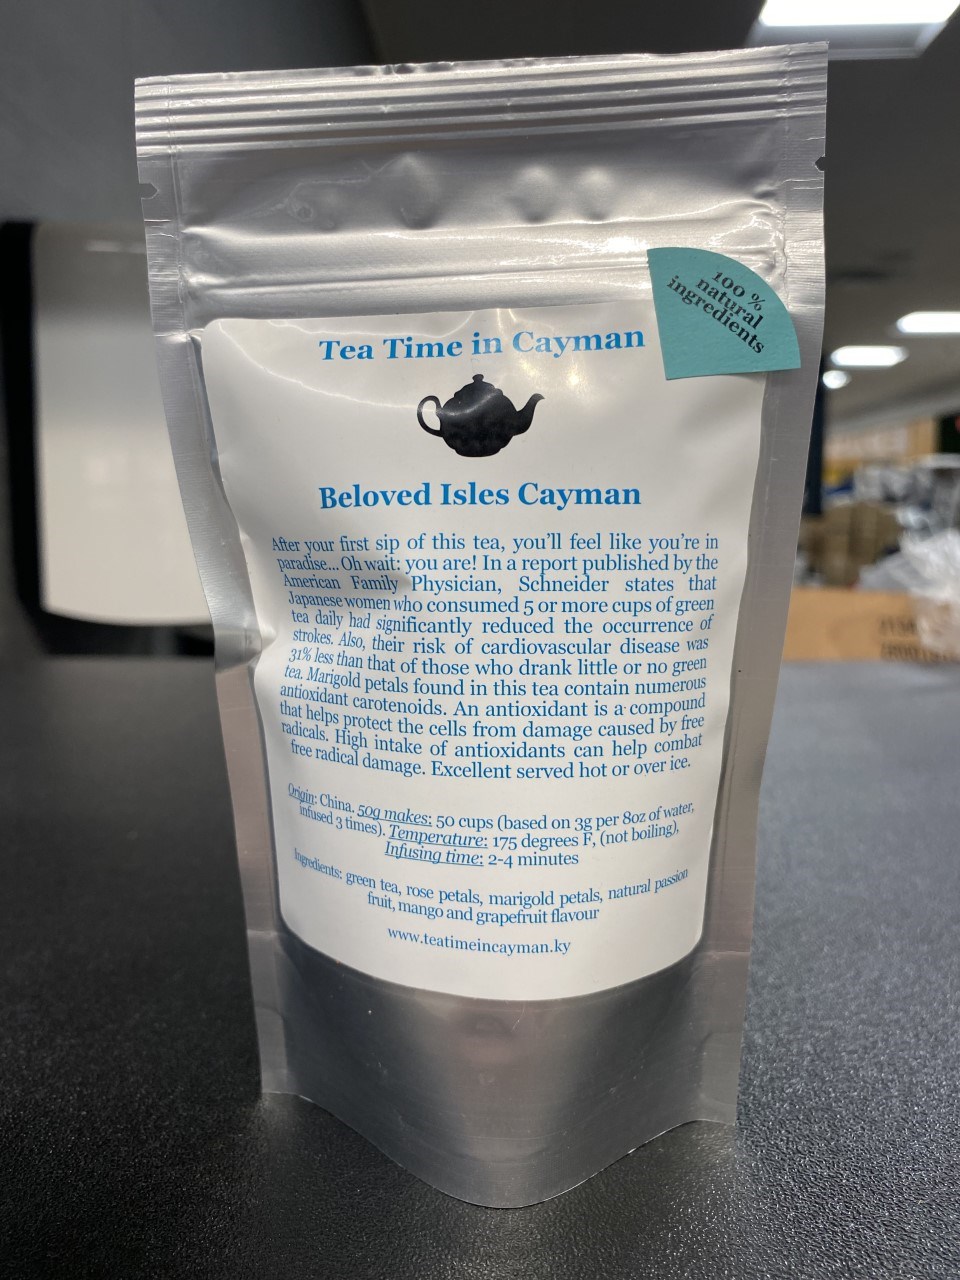 Made in Cayman: Its always tea time in Cayman